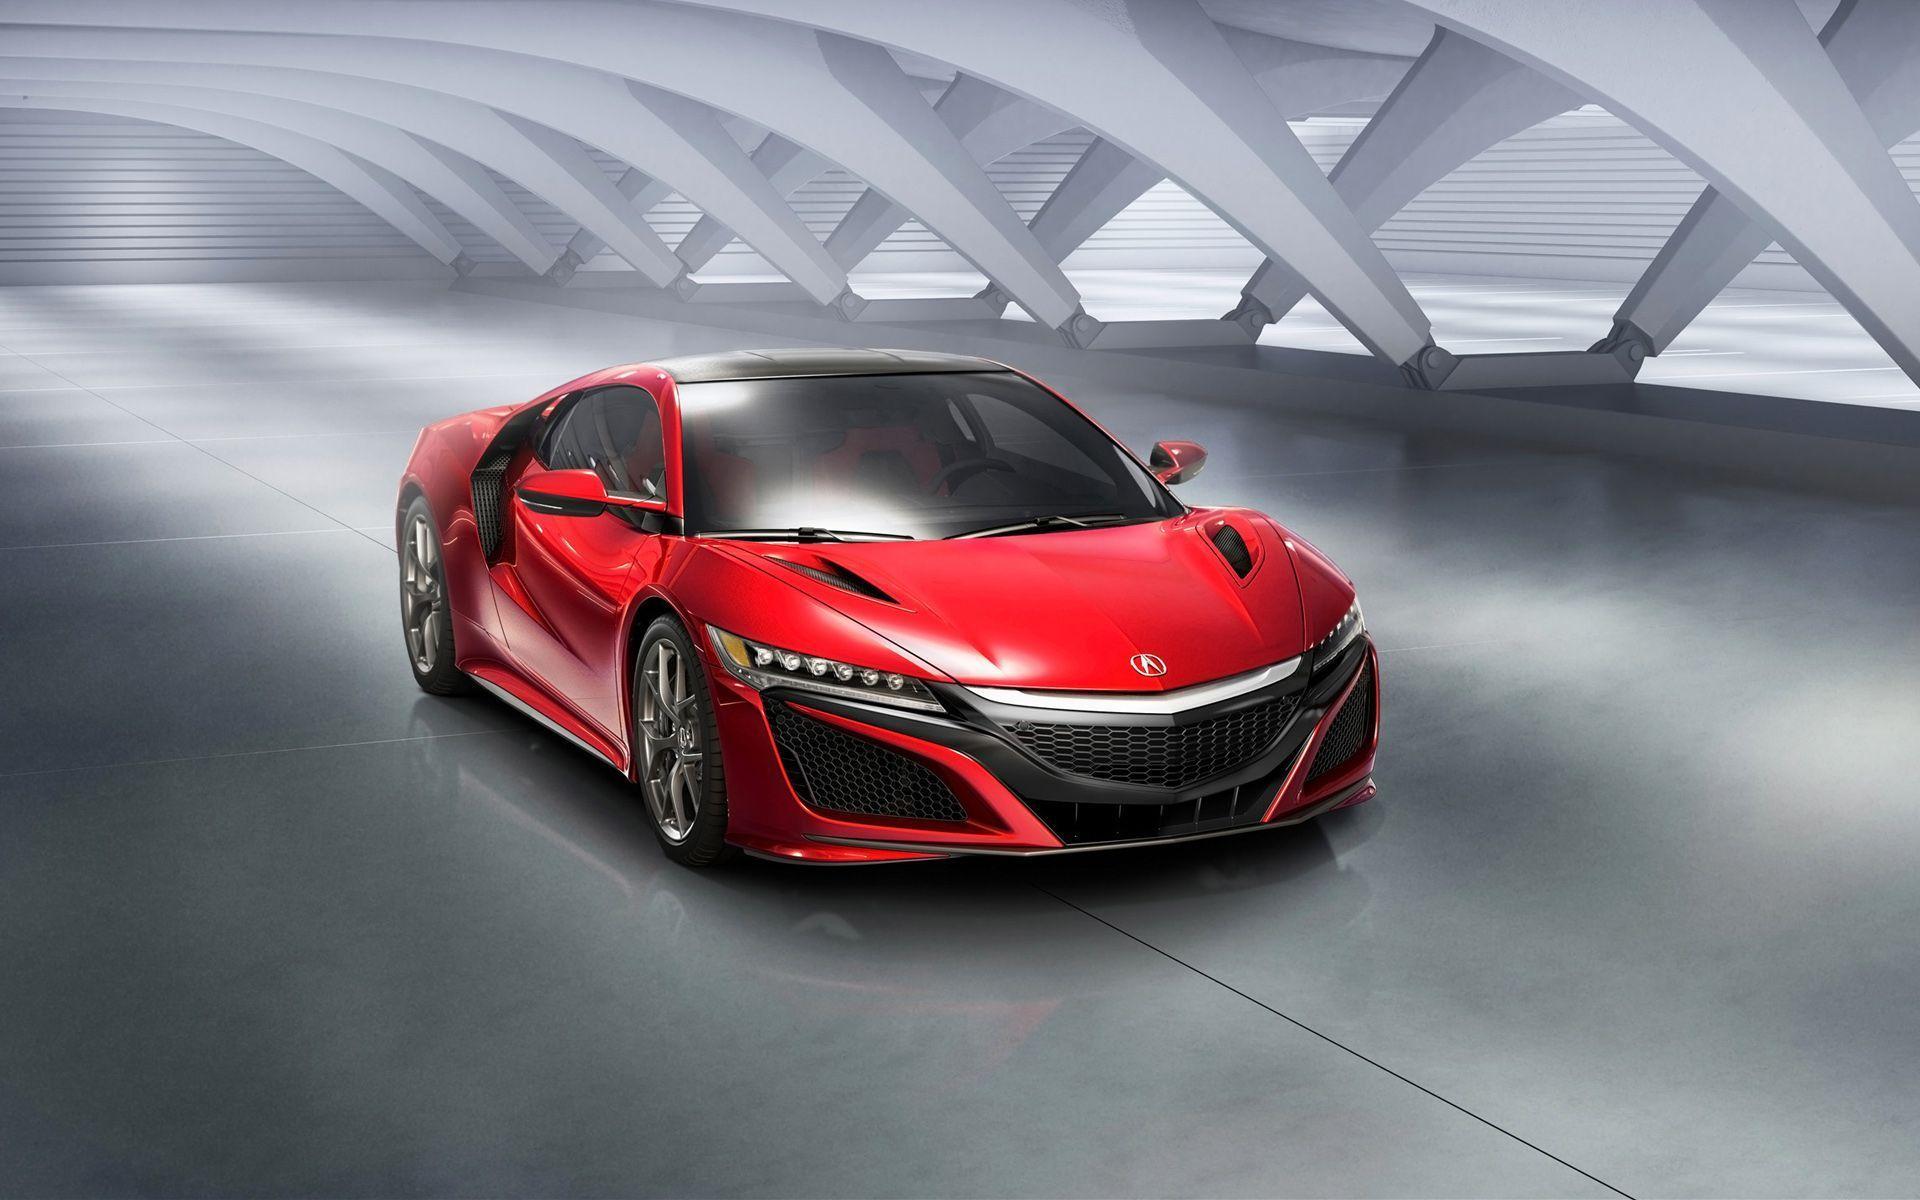 New ACURA NSX 2016 Red Car Wallpaper